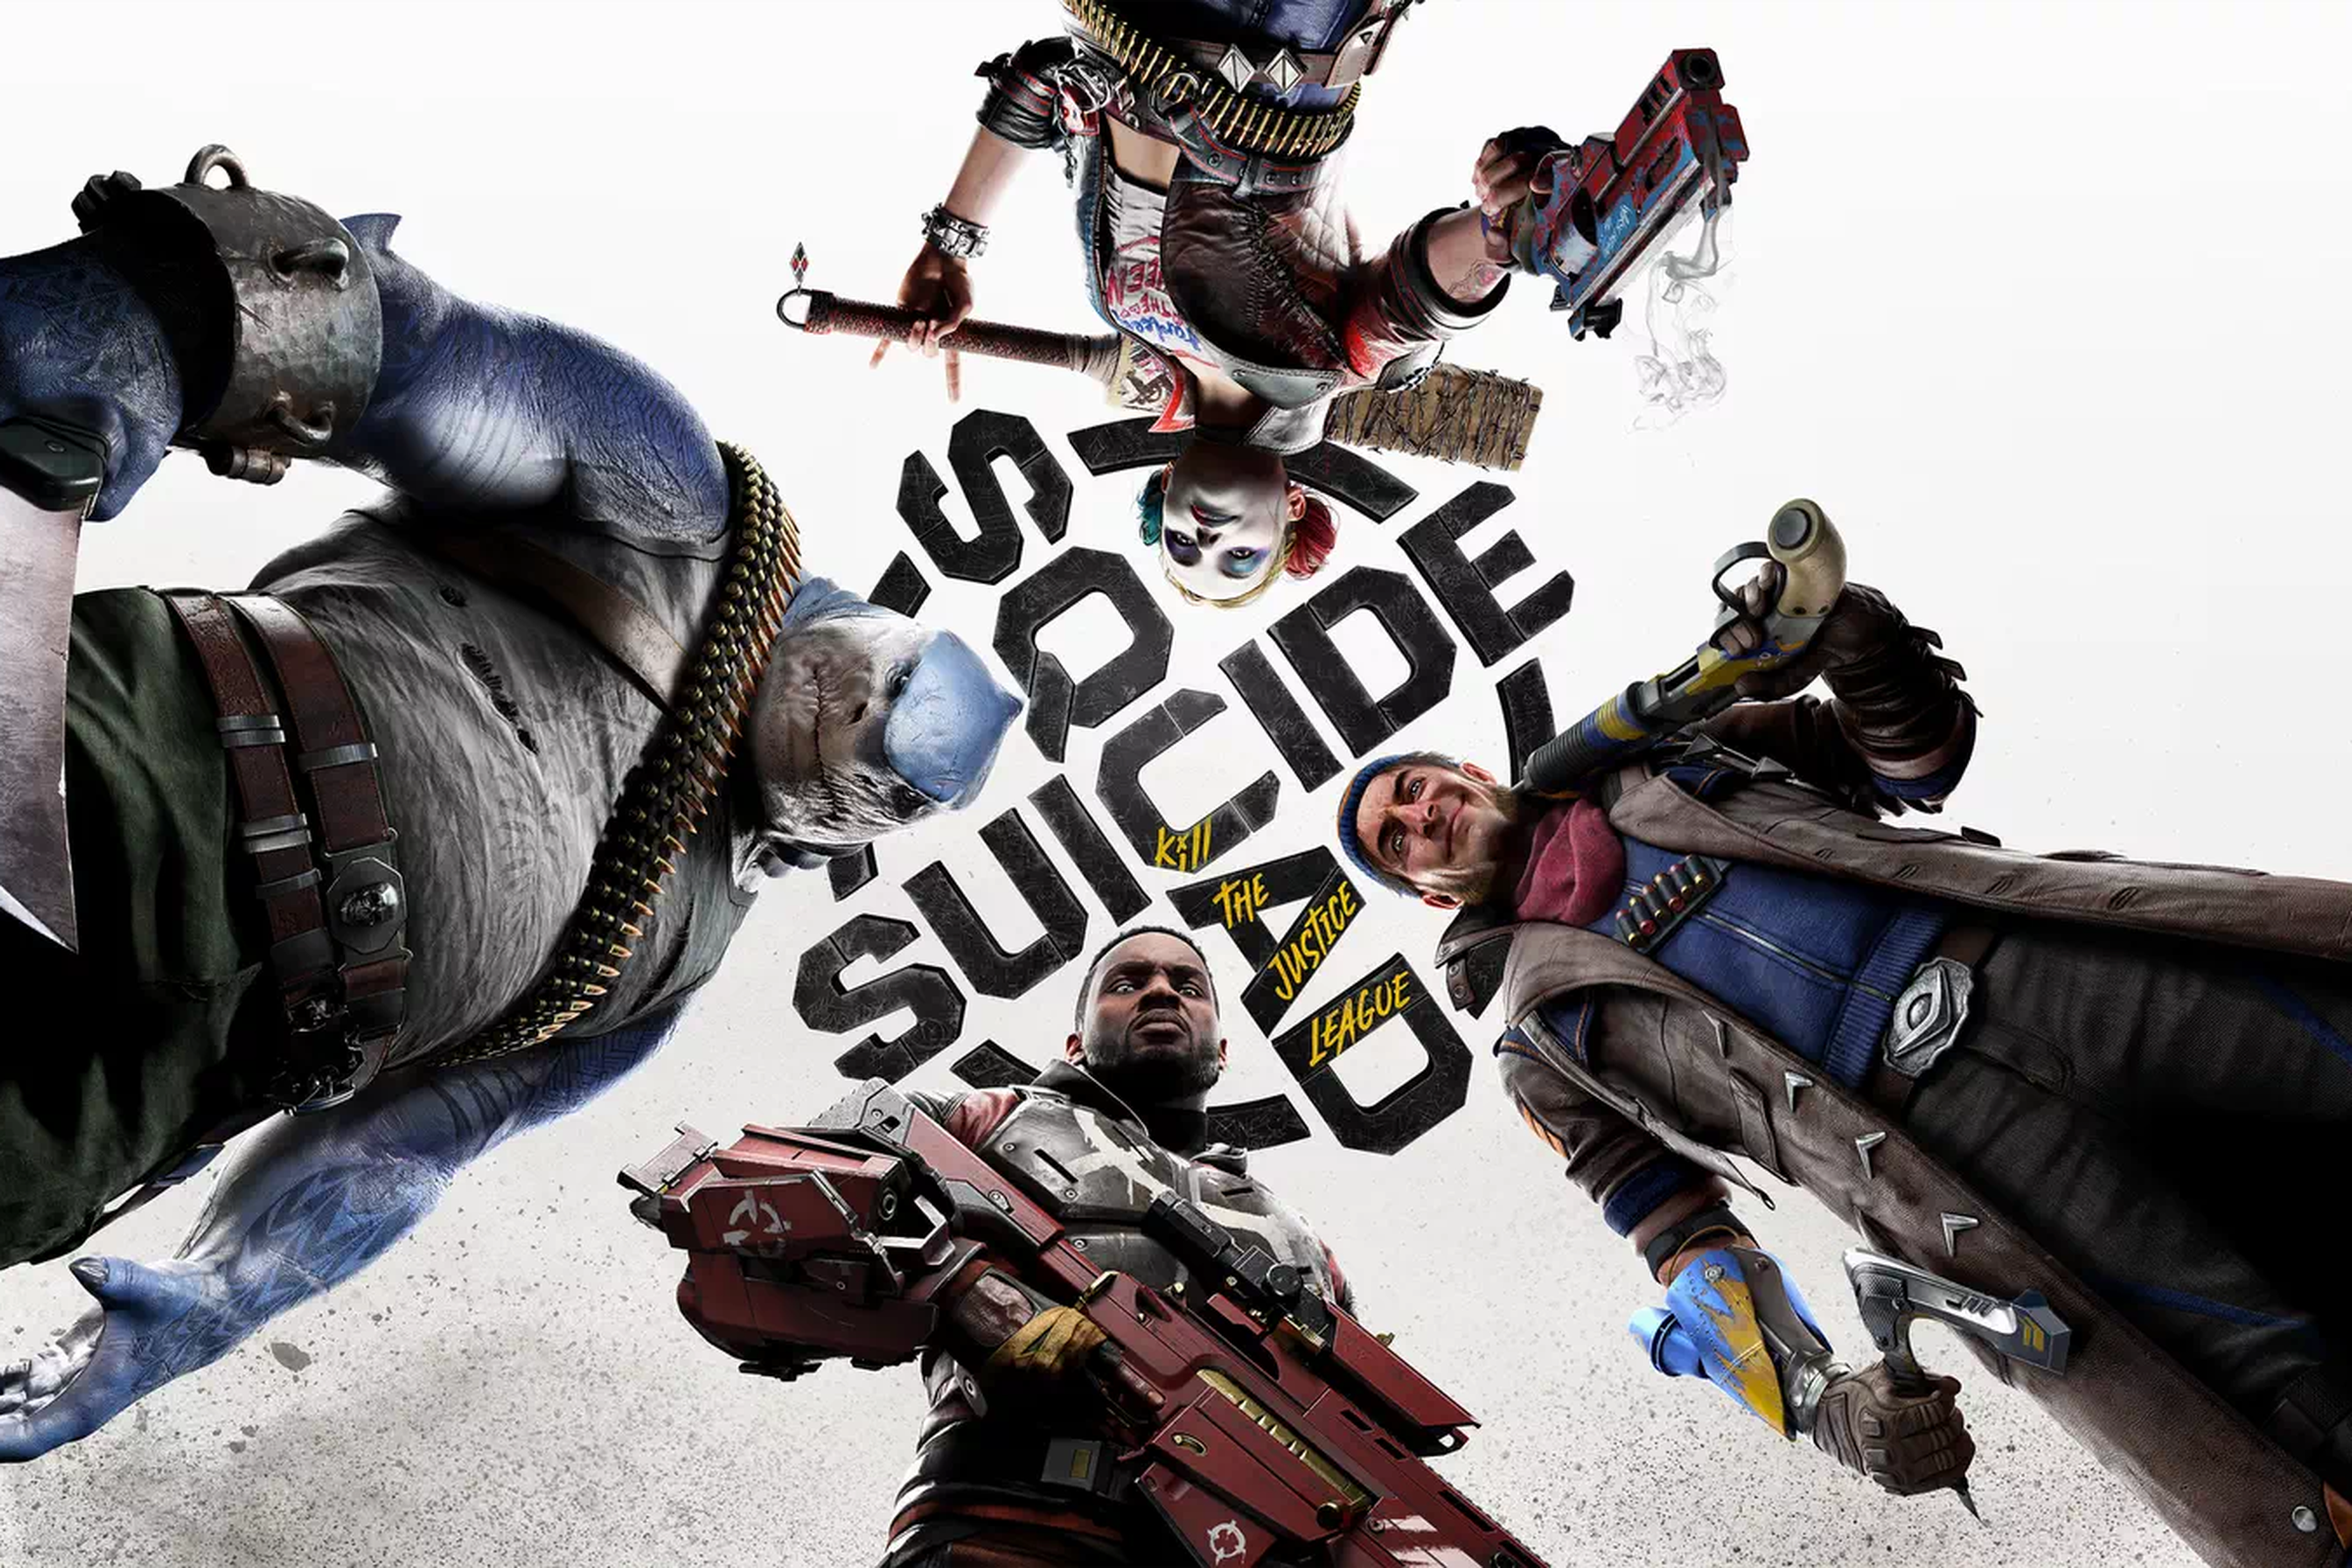 Image from Suicide Squad: Kill the Justice League featuring Harley Quinn, Captain Boomerang, King Shark, and Deadshot standing in a circle looking down at the viewer